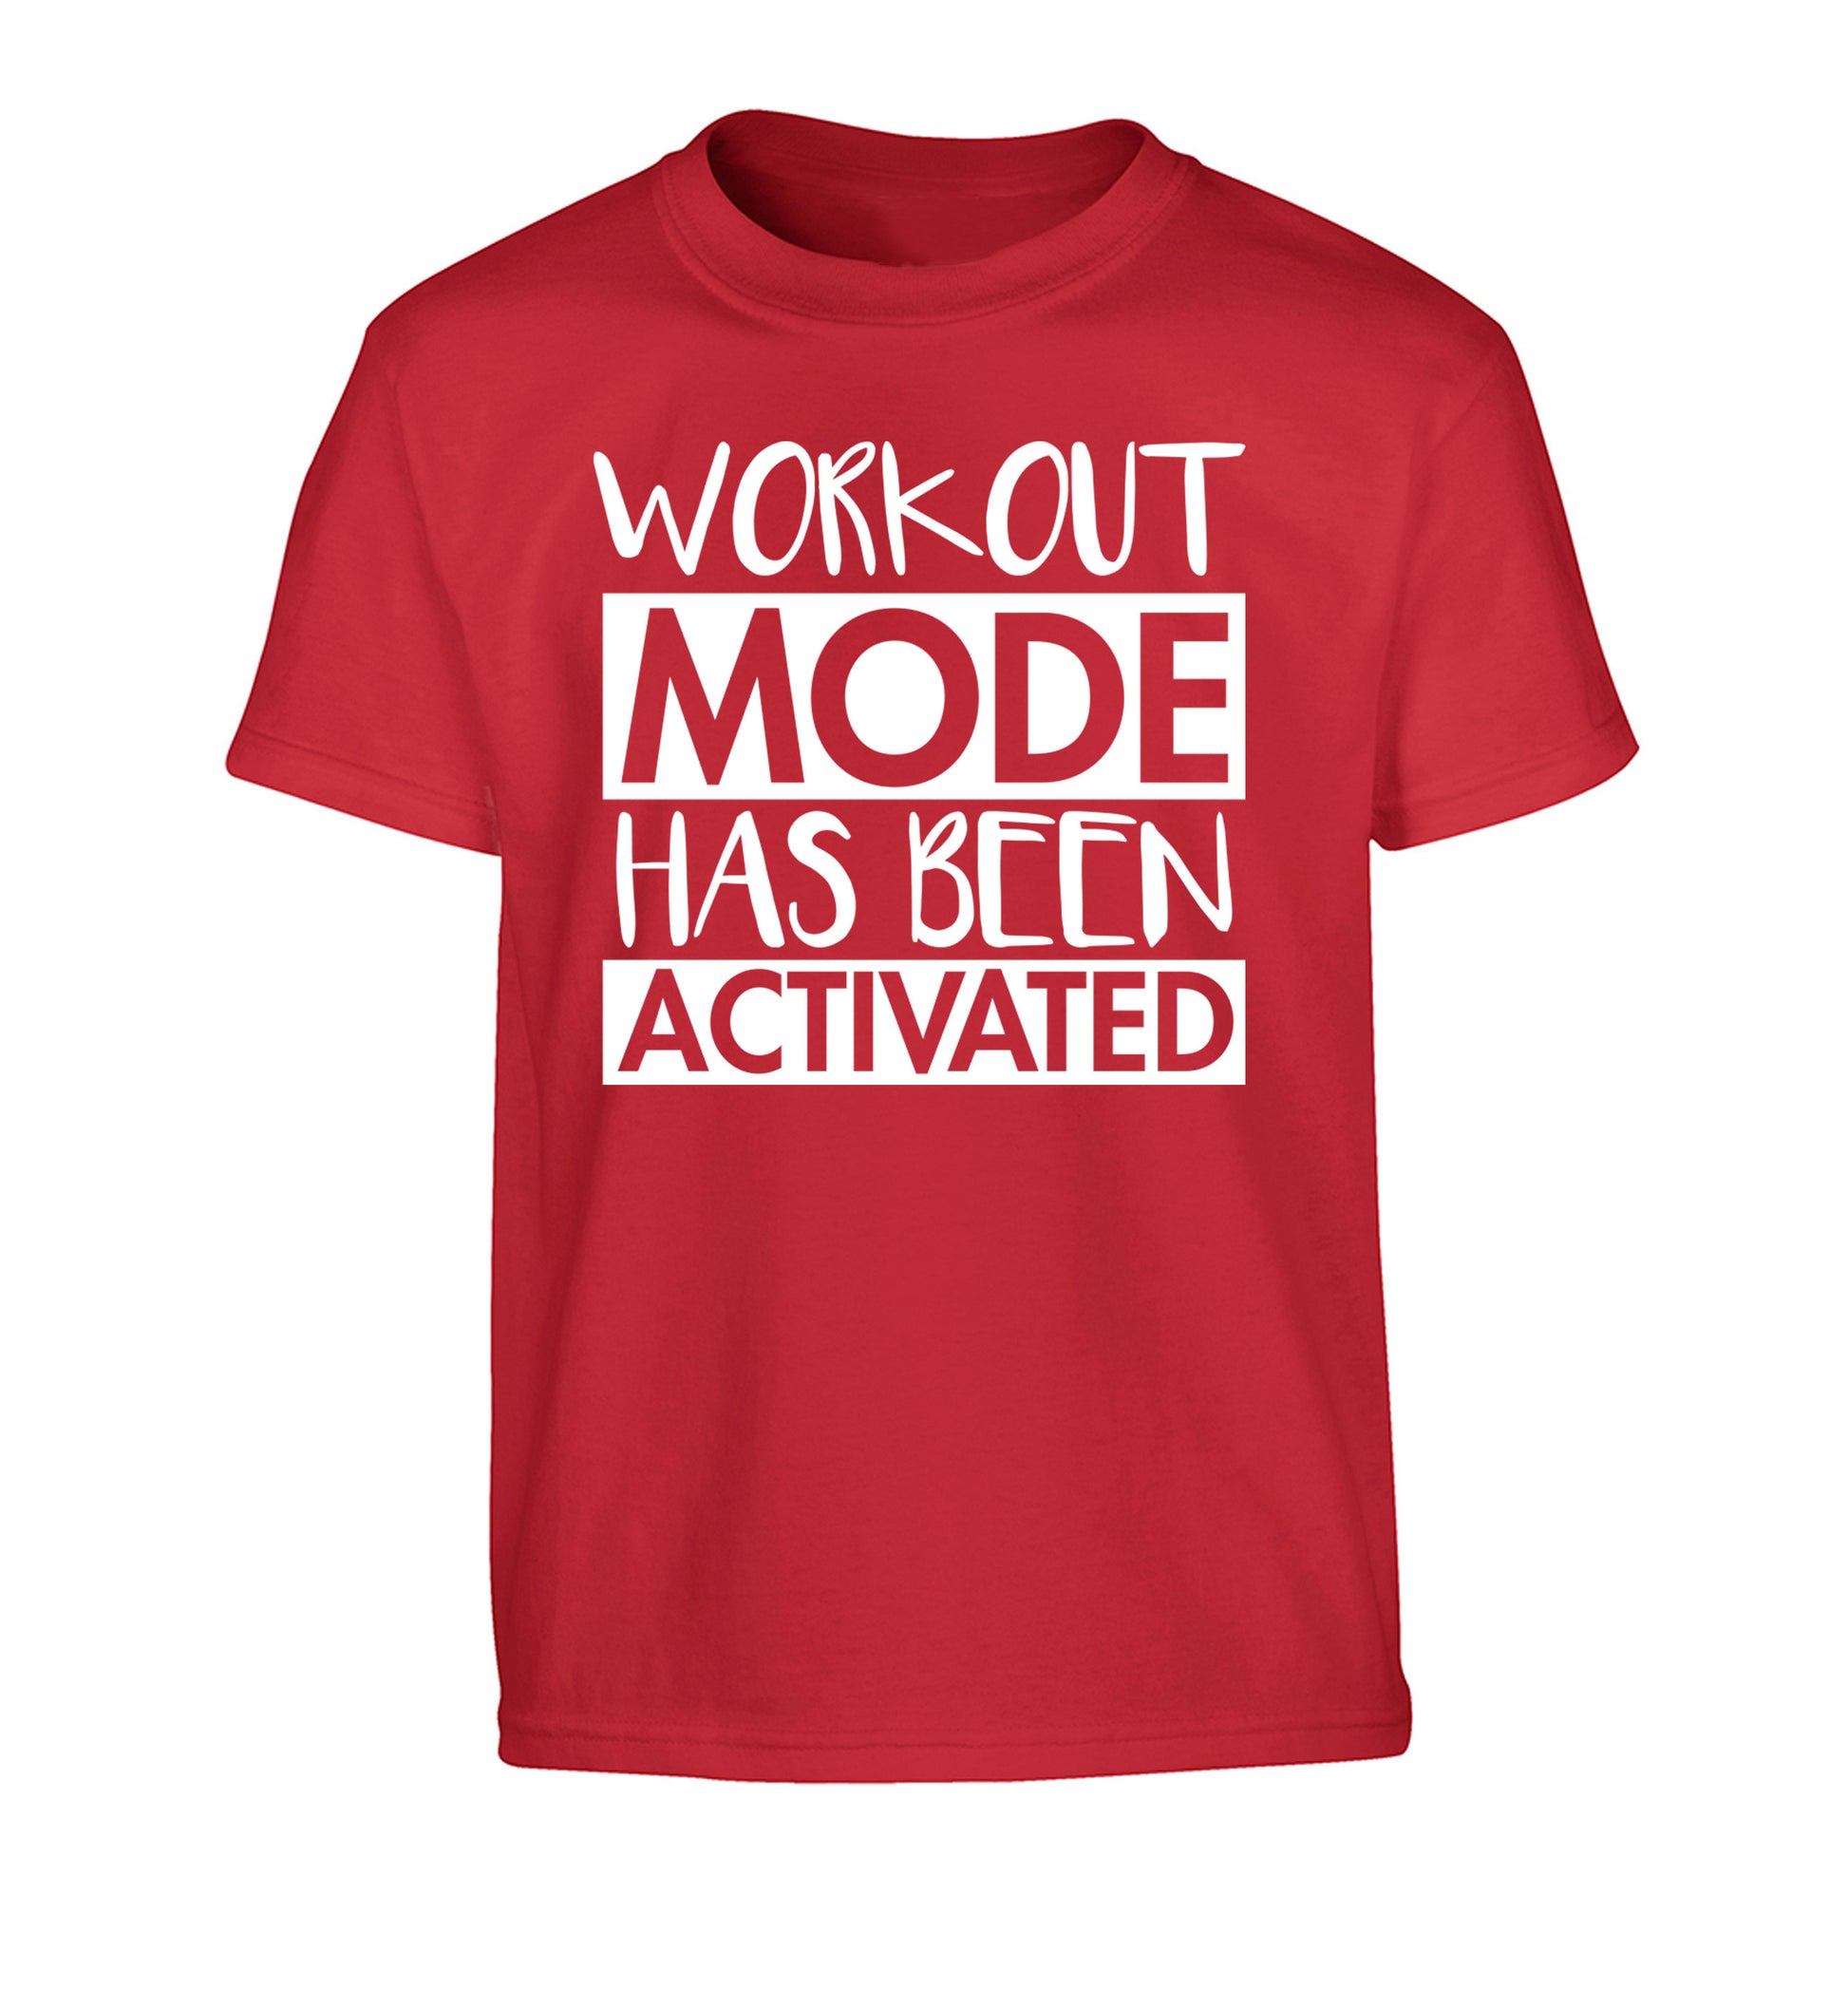 Workout mode has been activated Children's red Tshirt 12-14 Years